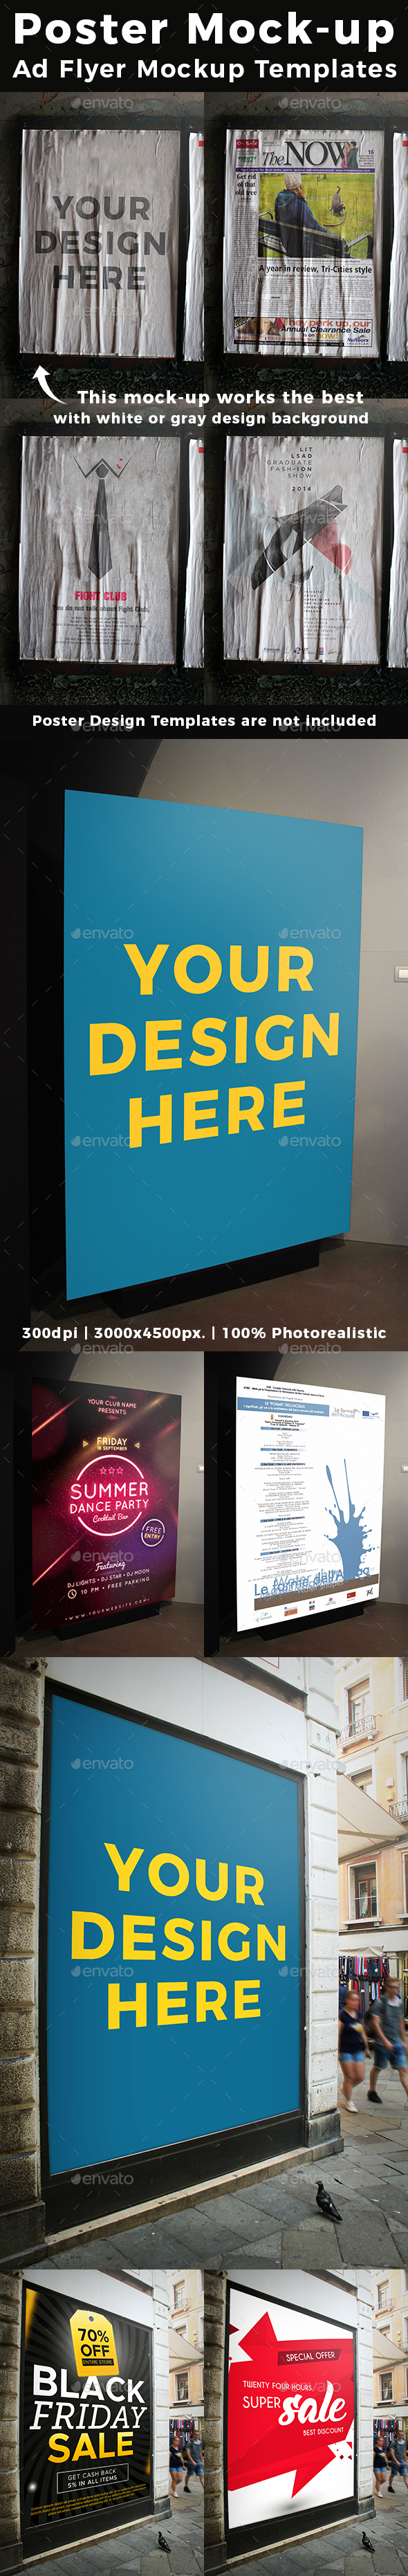 Download Poster Mockups From Graphicriver Yellowimages Mockups